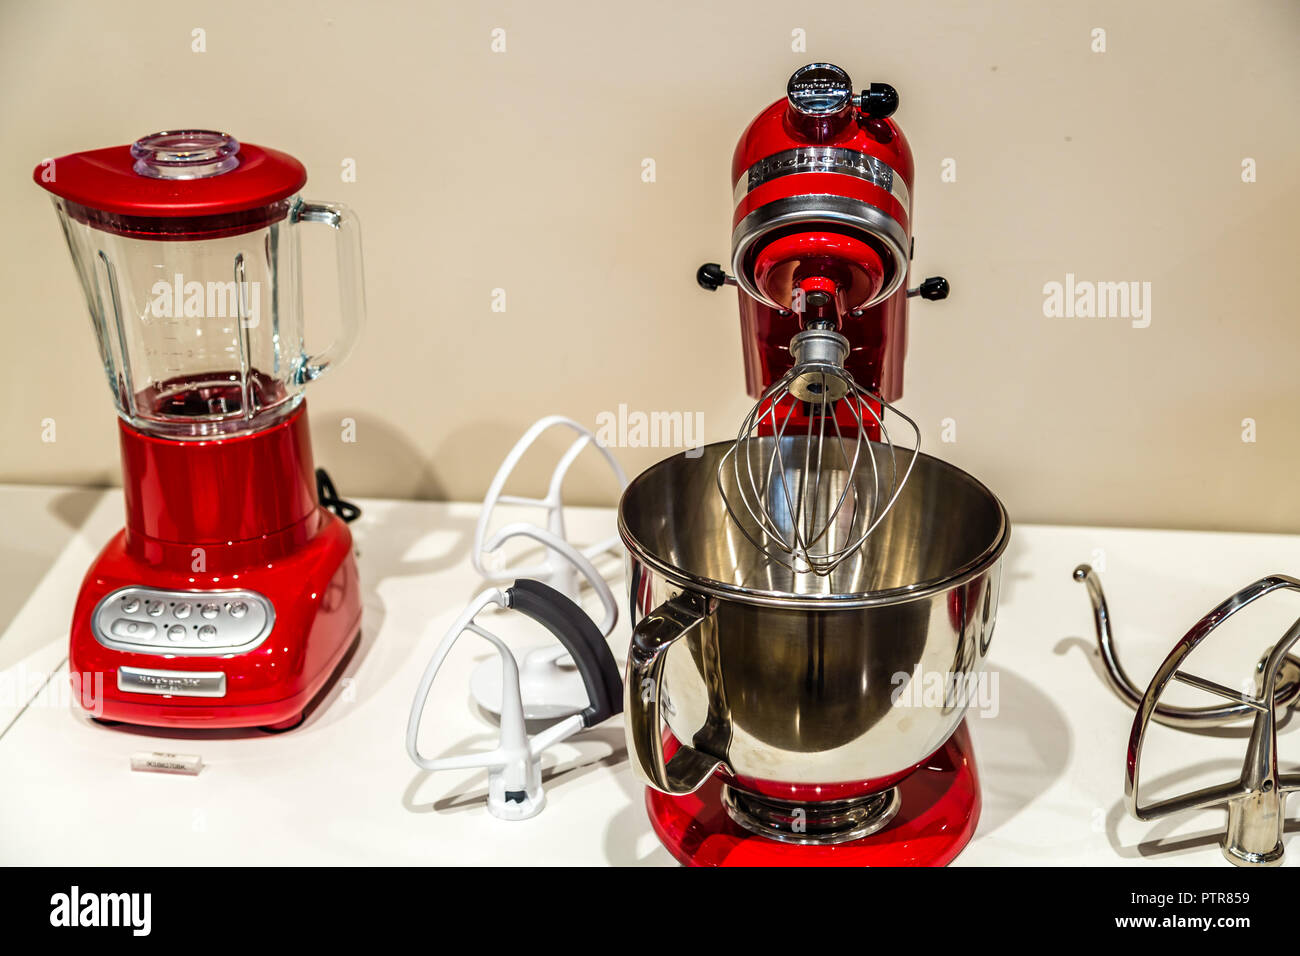 https://c8.alamy.com/comp/PTR859/bologna-italy-october-2-2018-lights-are-enlightening-kitchenaid-appliances-at-fico-eataly-world-the-largest-agri-food-park-in-the-world-PTR859.jpg